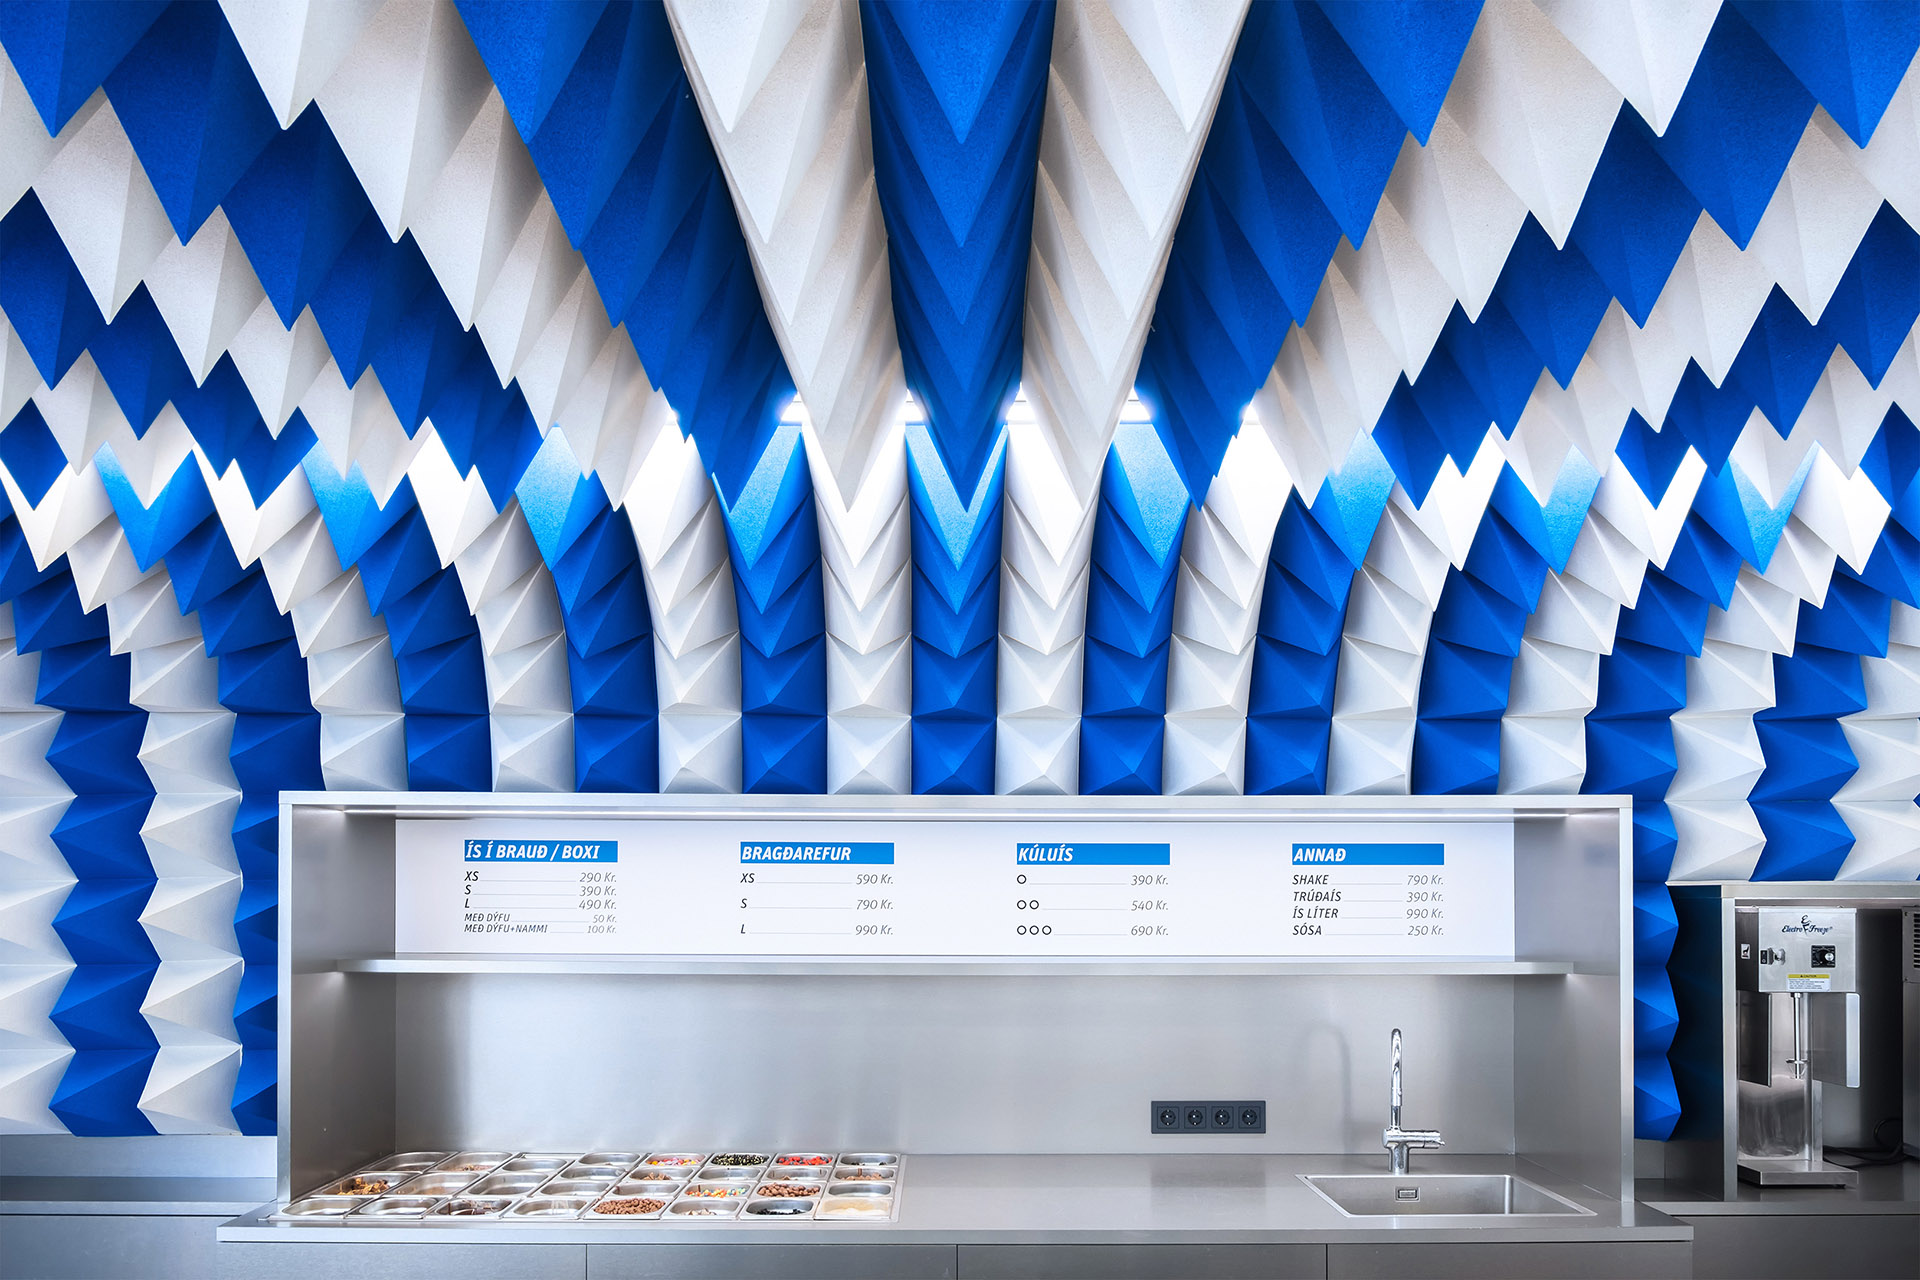 Games of geometries and colors. An ice cream shop in Reykjavík is inspired by an abstract ice cave